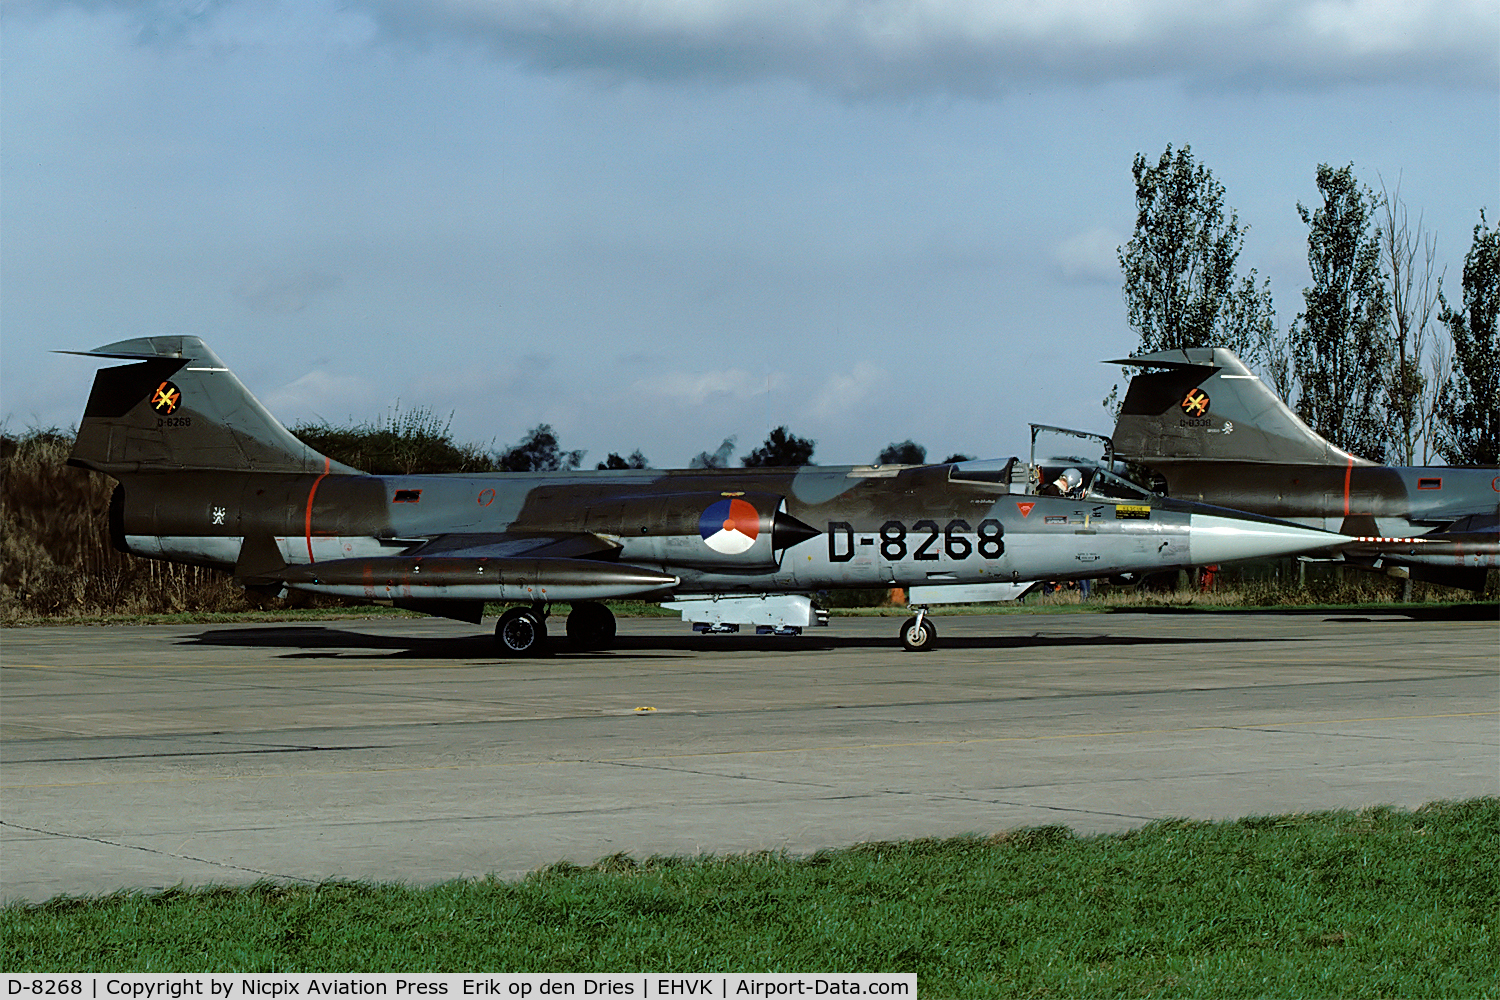 D-8268, Lockheed F-104G Starfighter C/N 683-8268, D-8268 sen here ready for a mission to the weapons range